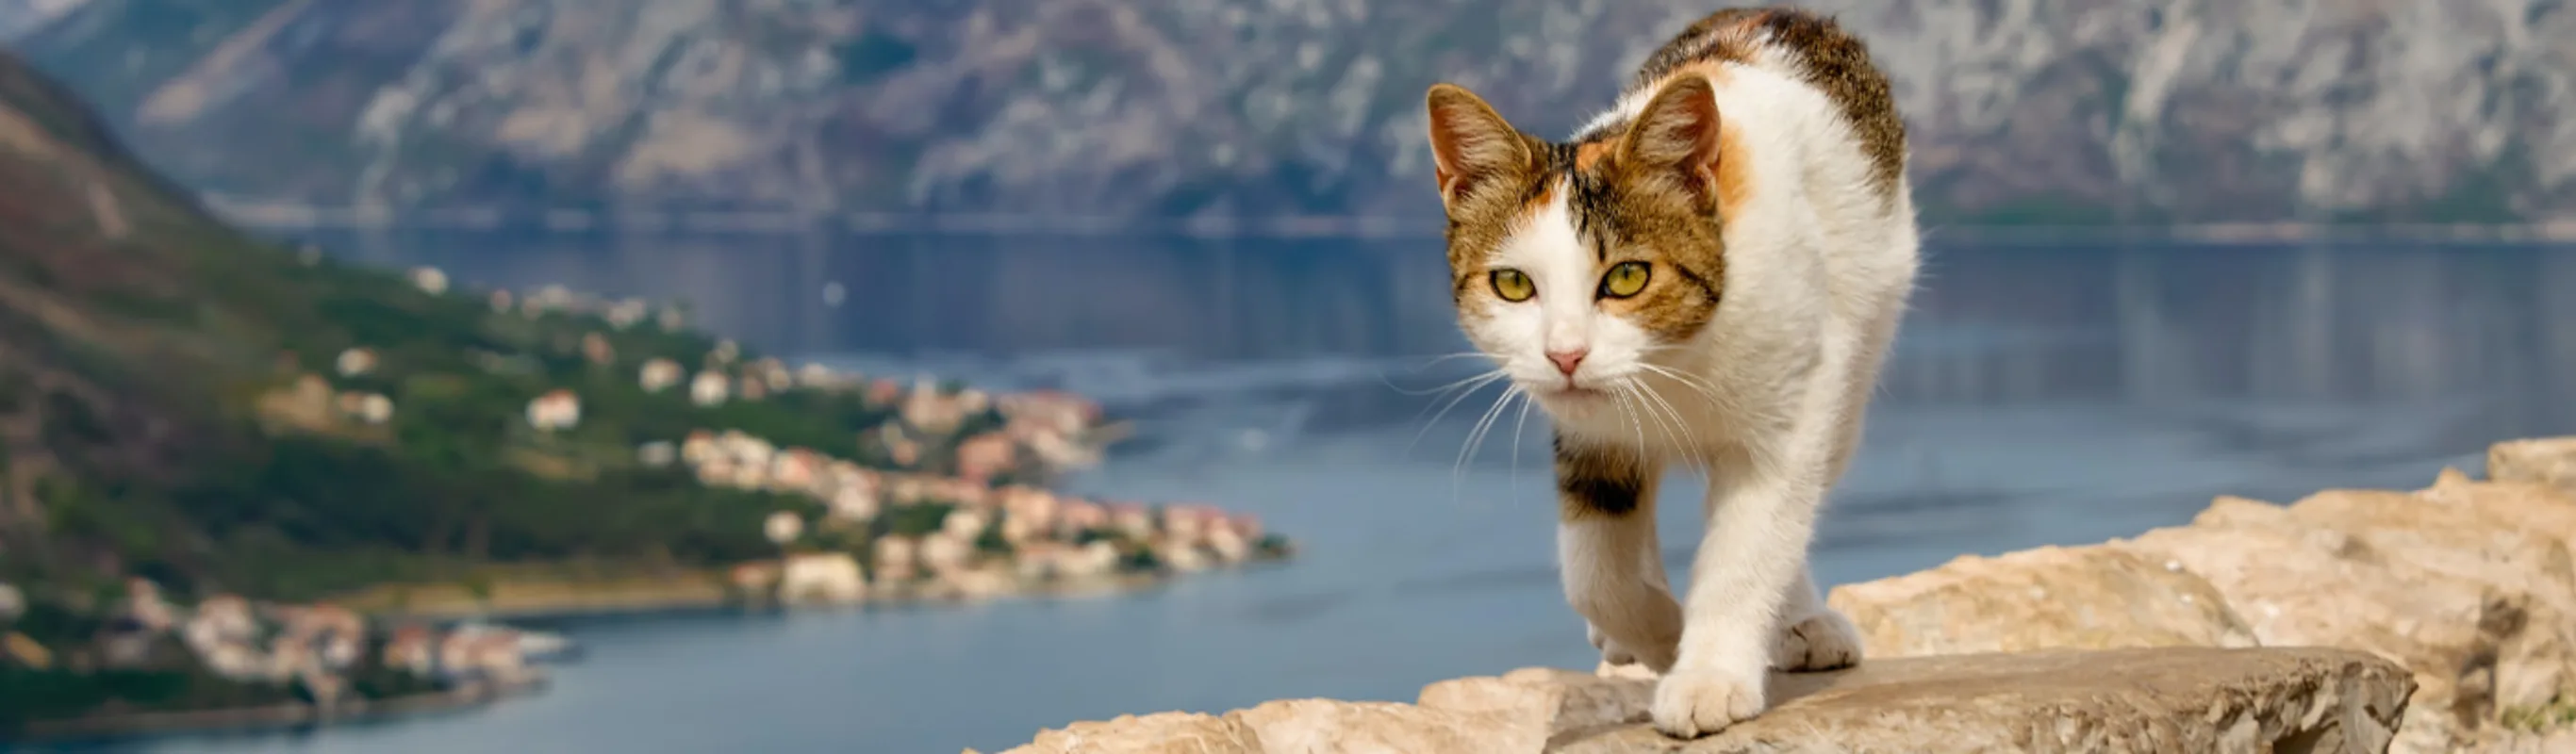 A cat walking on rocks with a lake in the background